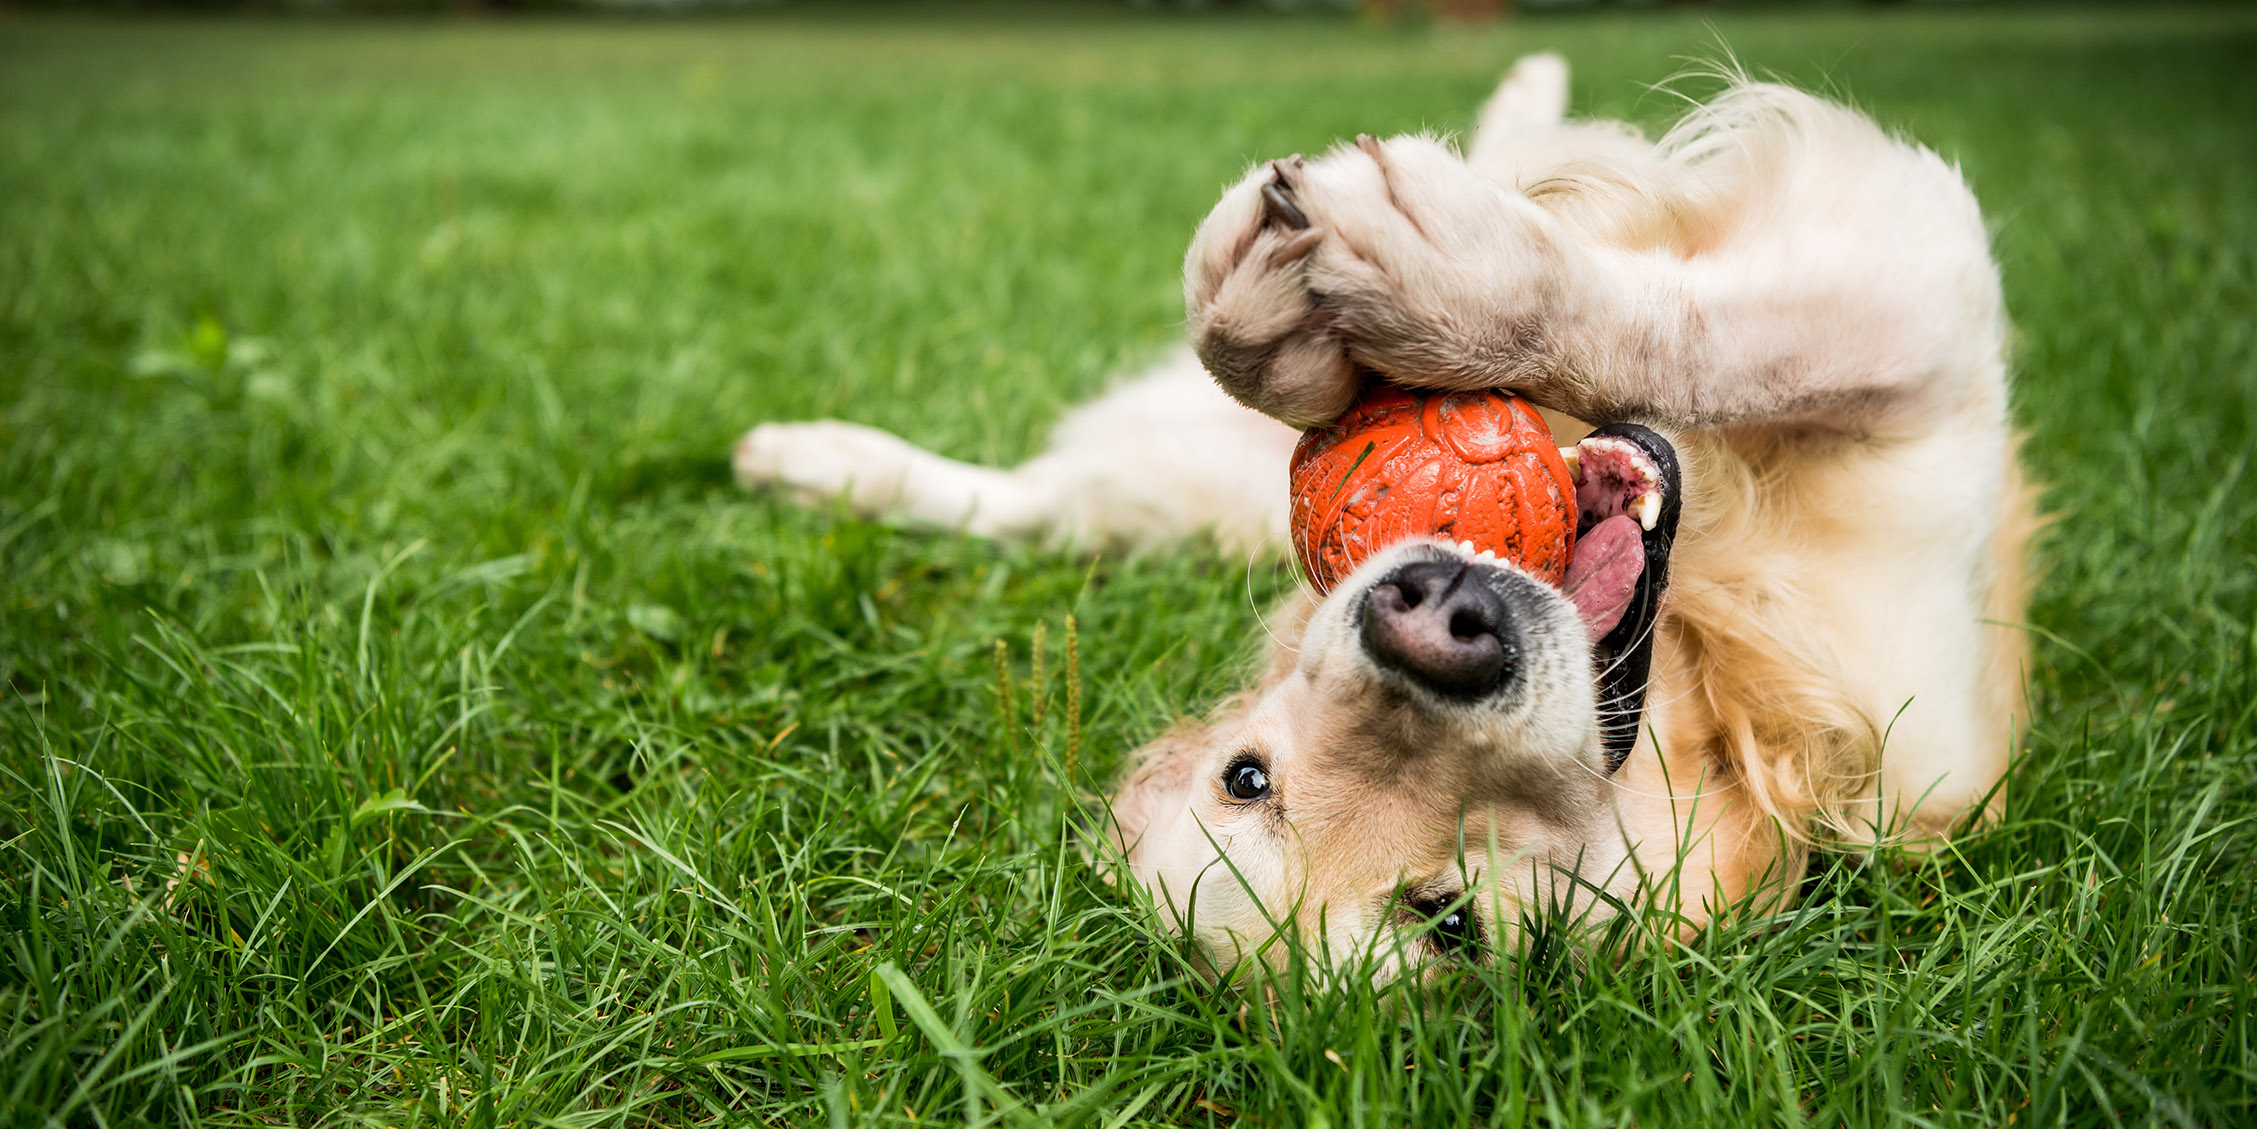 Golden Retriever dog playing with a ball in the grass of a dog park.